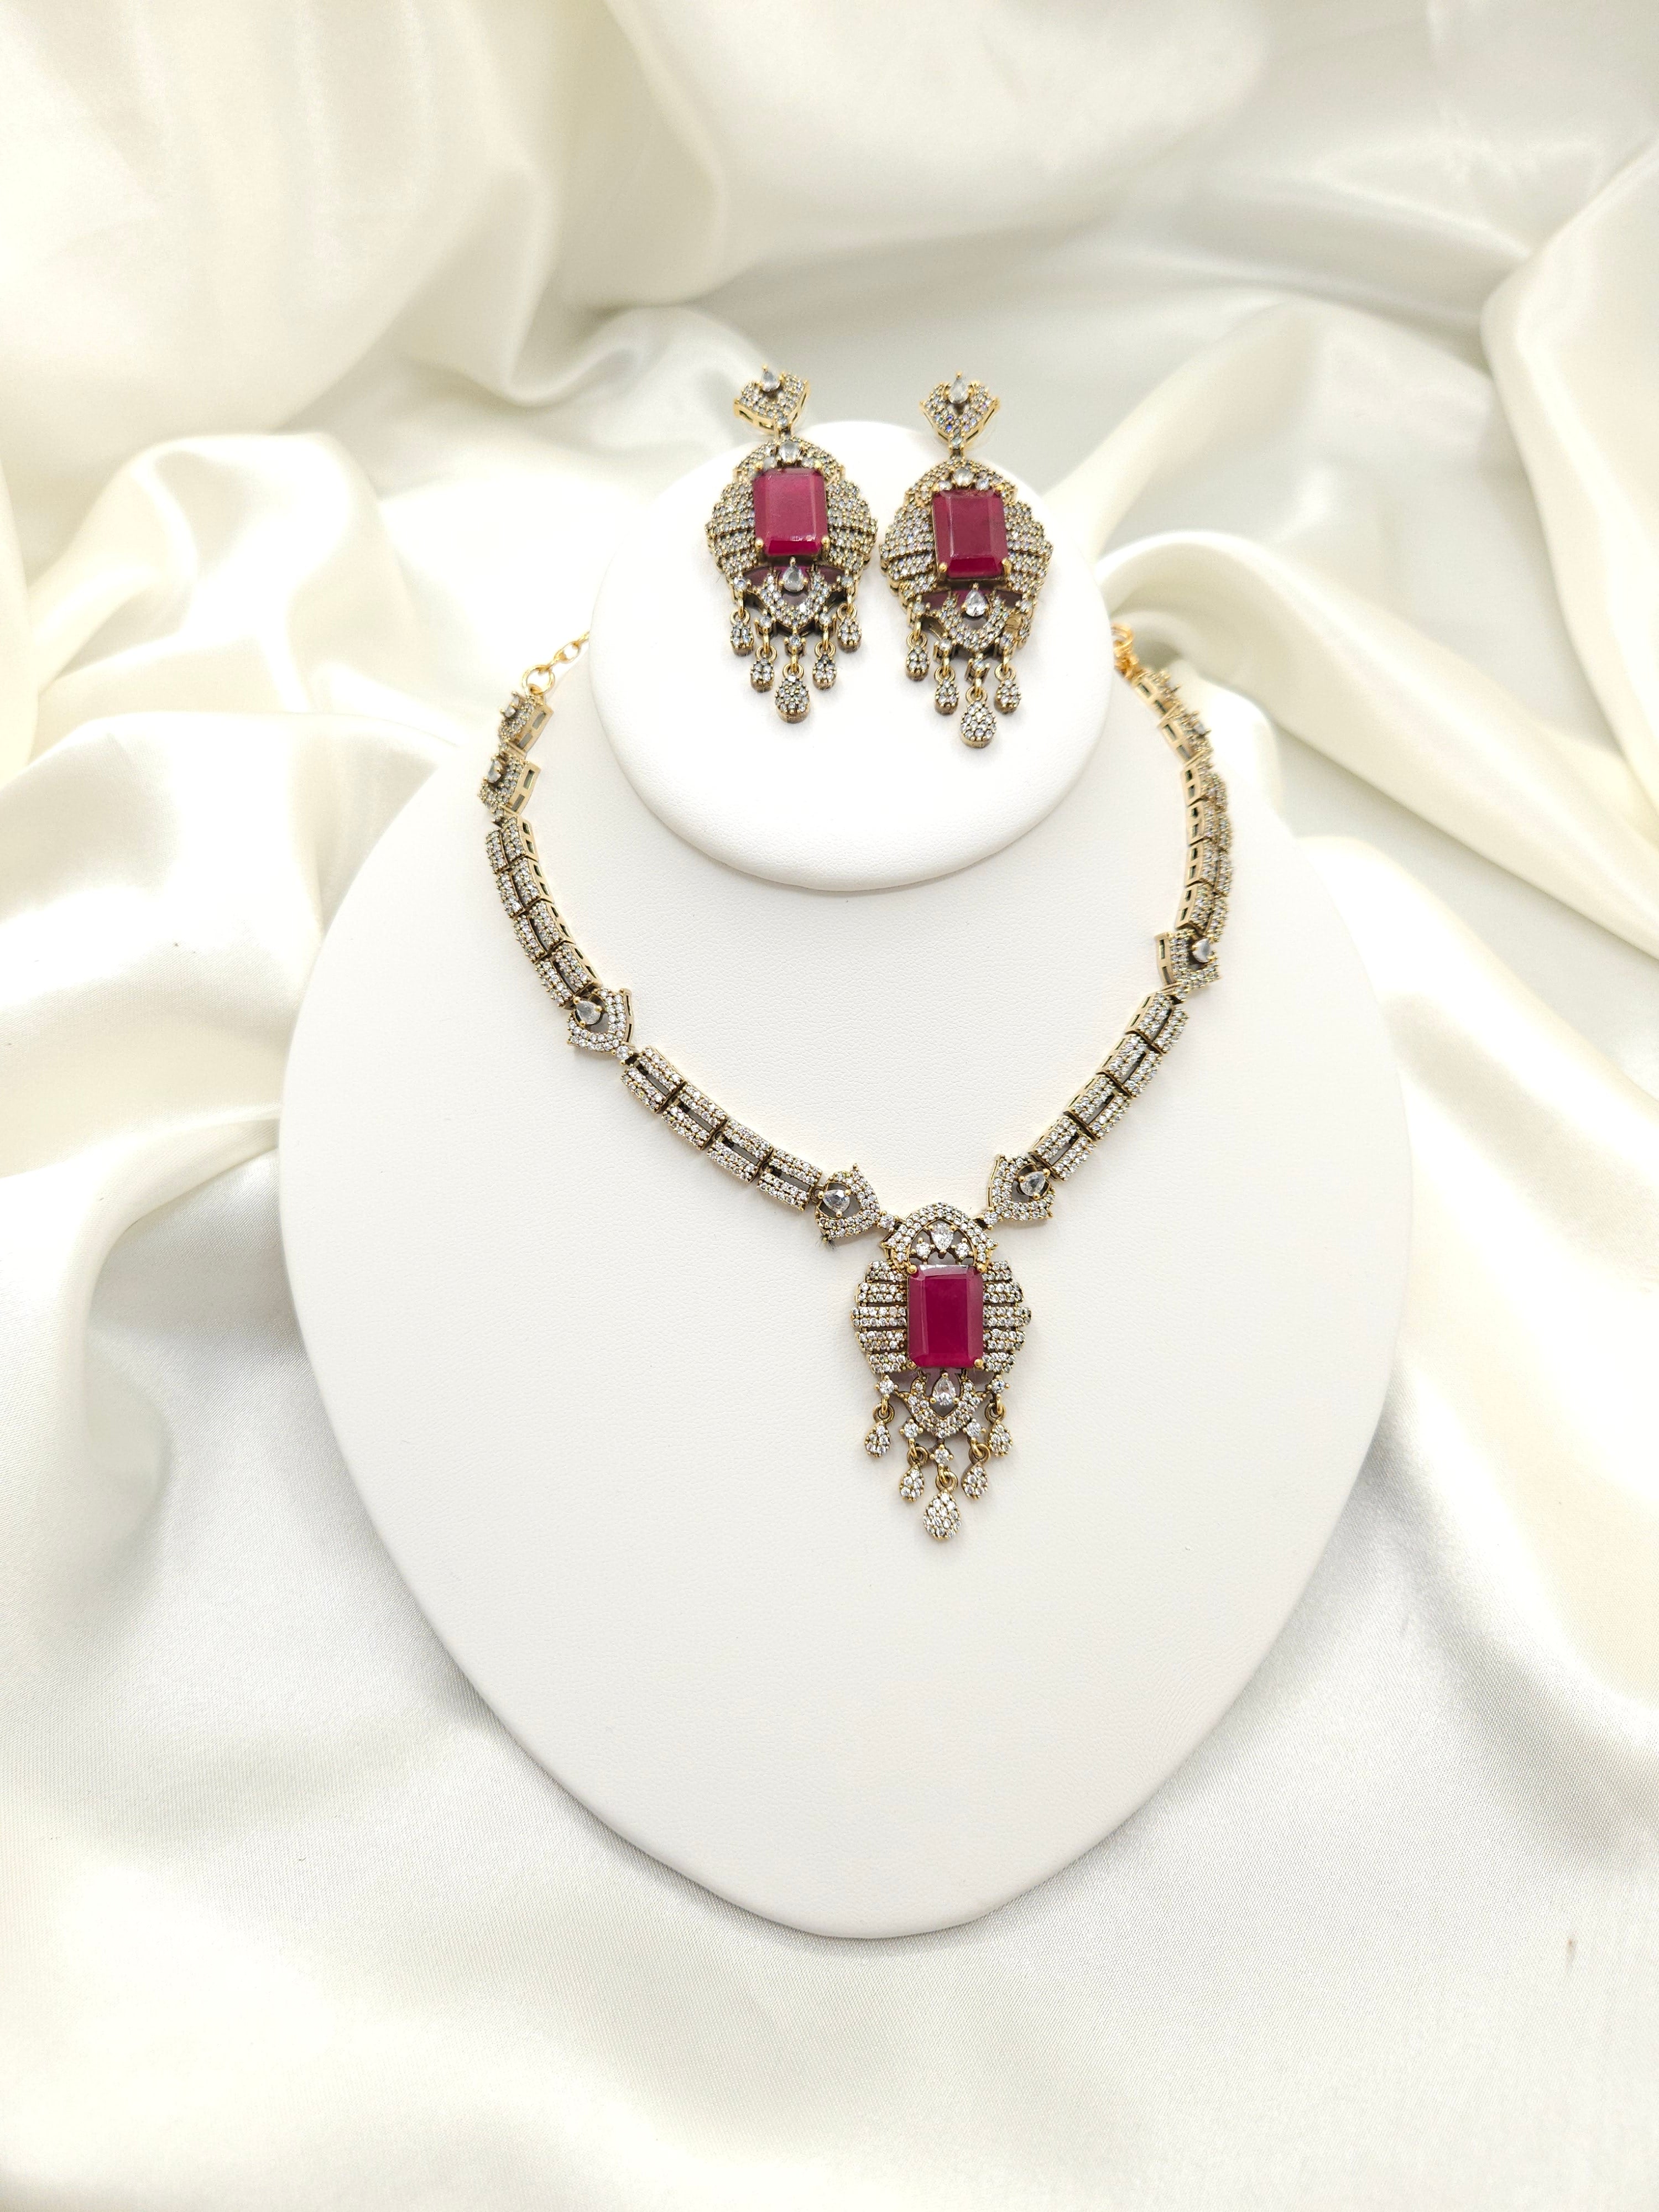 Victorian polki ad necklace with earrings